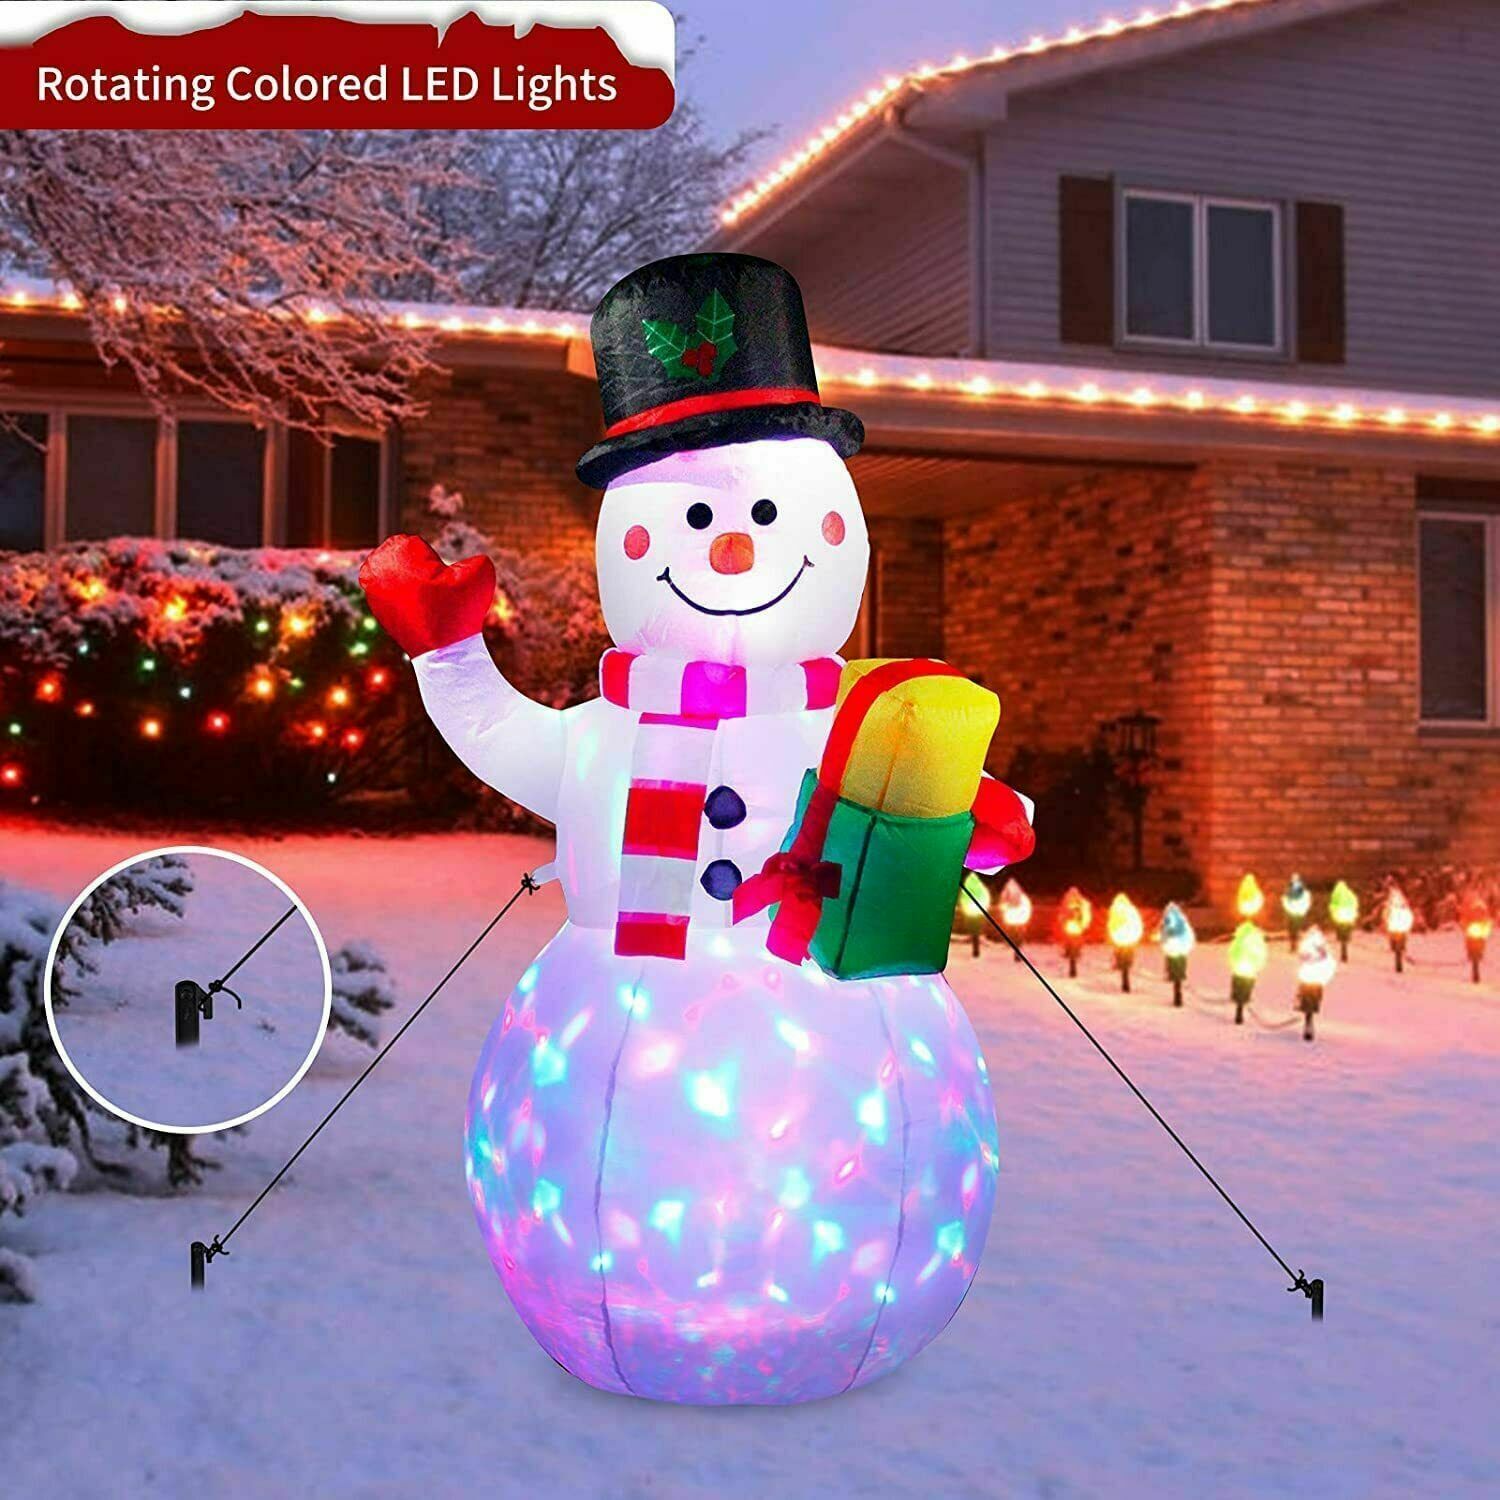 5ft Christmas Inflatables Snowman Outdoor Yard Decor with Rotating LED Lights Christmas Blow Up Decoration Garden - image 3 of 9